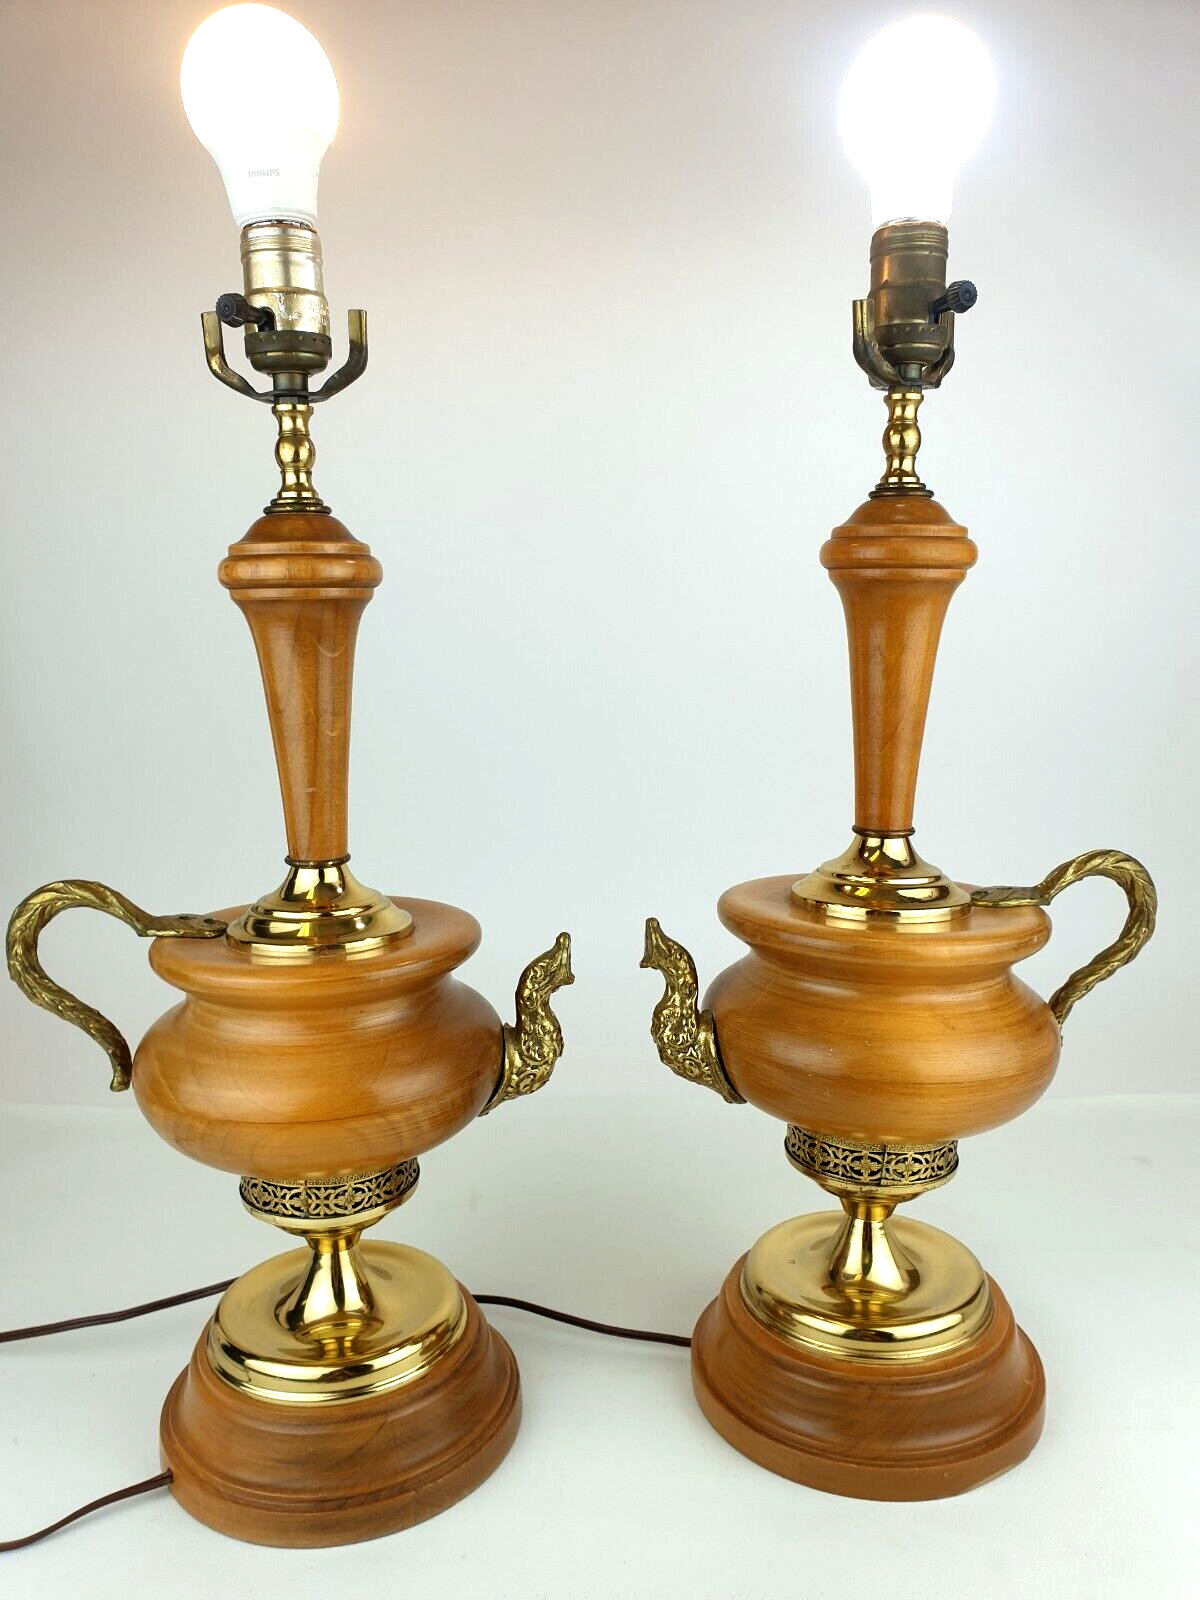 MCM Turned Wood & Ornate Brass Teapot Table Lamp Pair Unique Vintage Kitschy